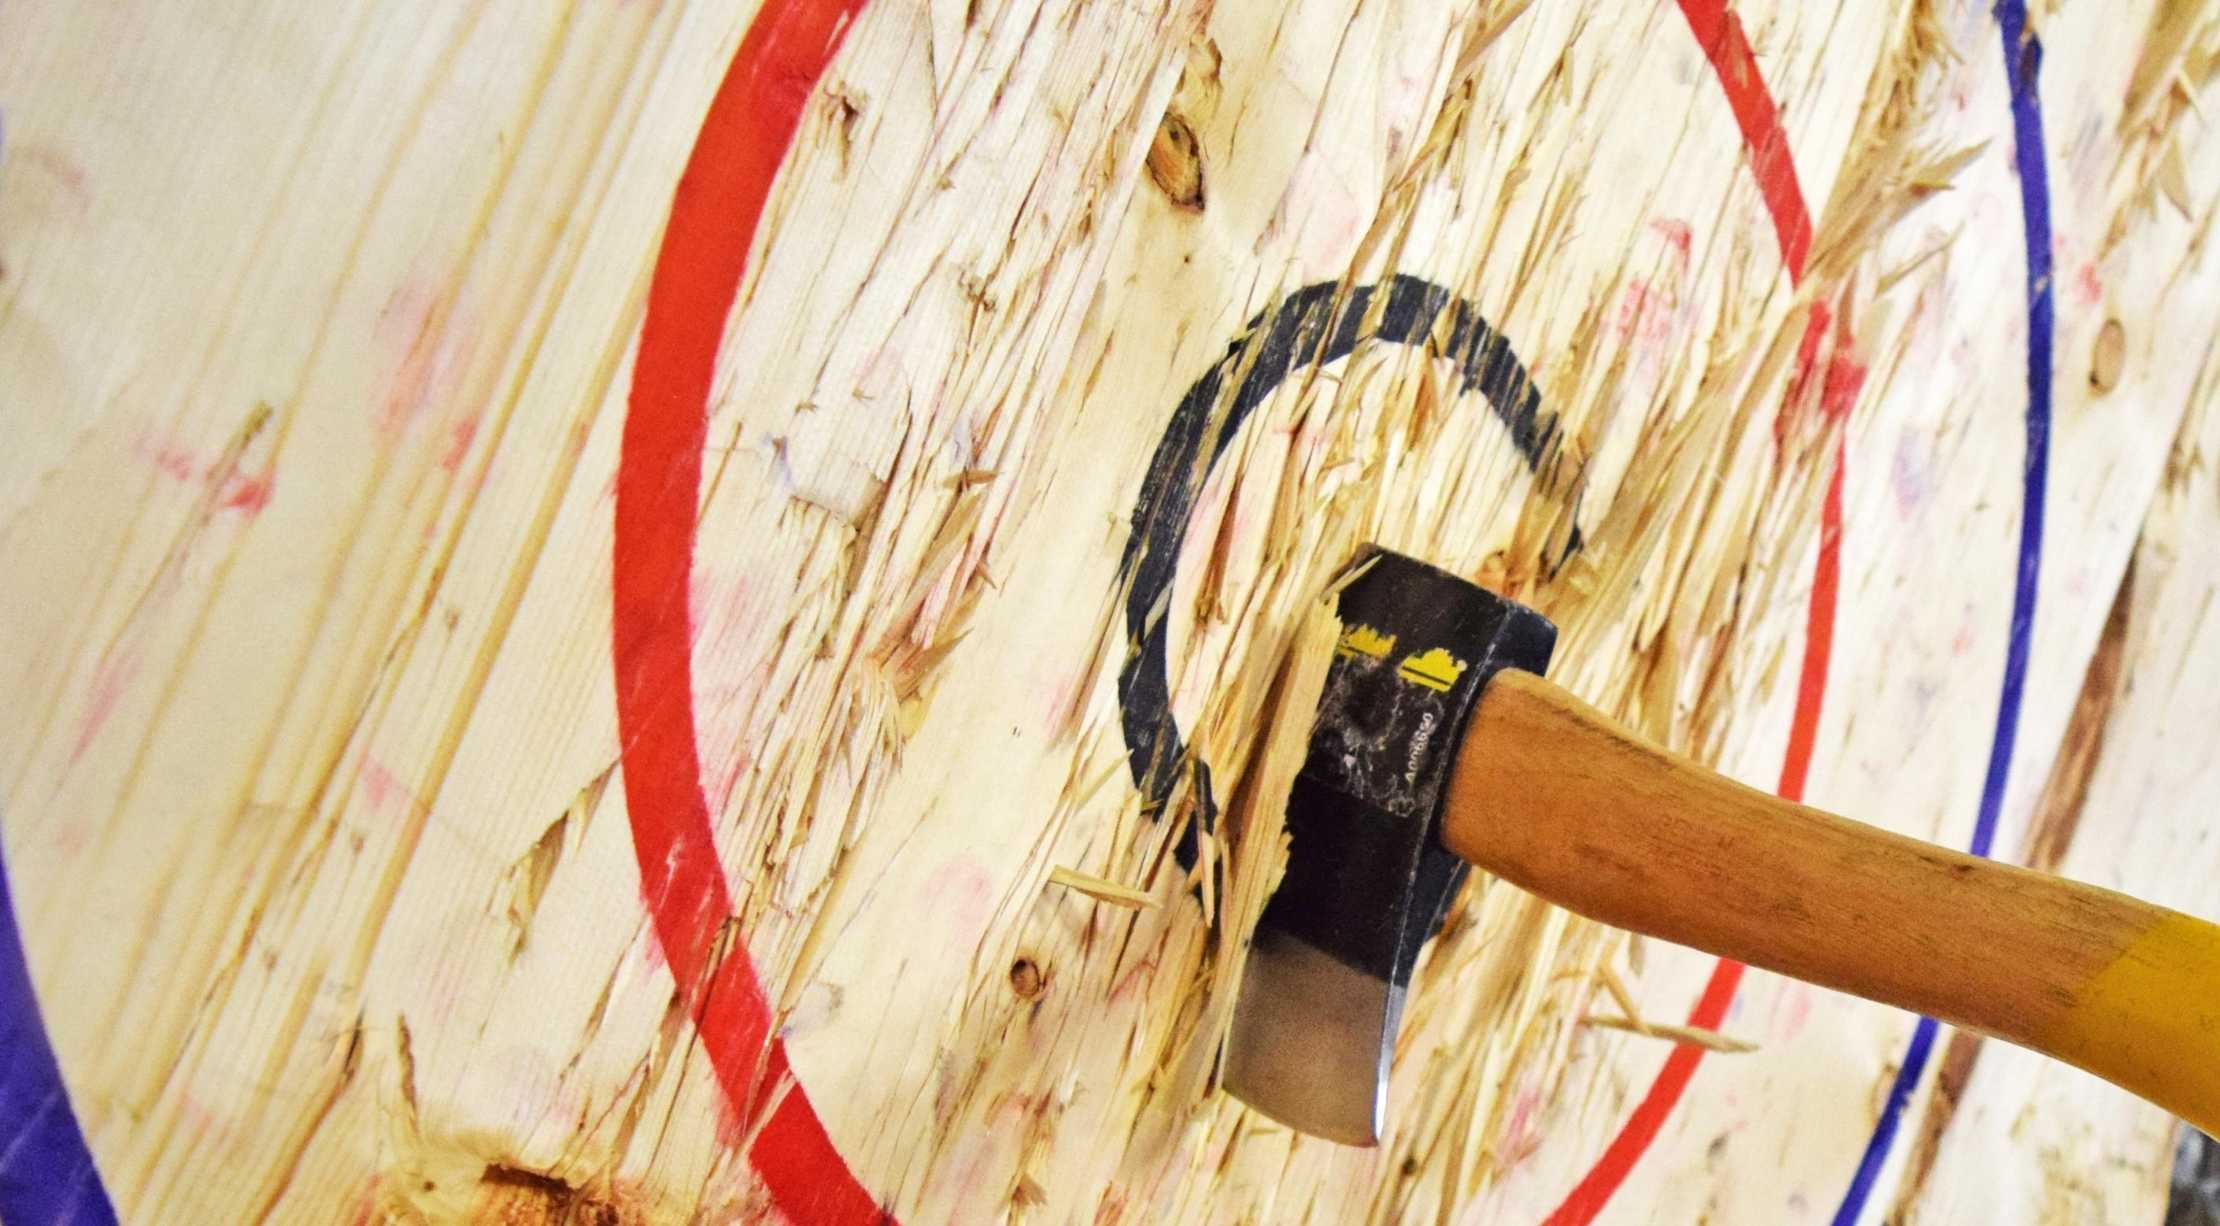 Axe Throwing Background